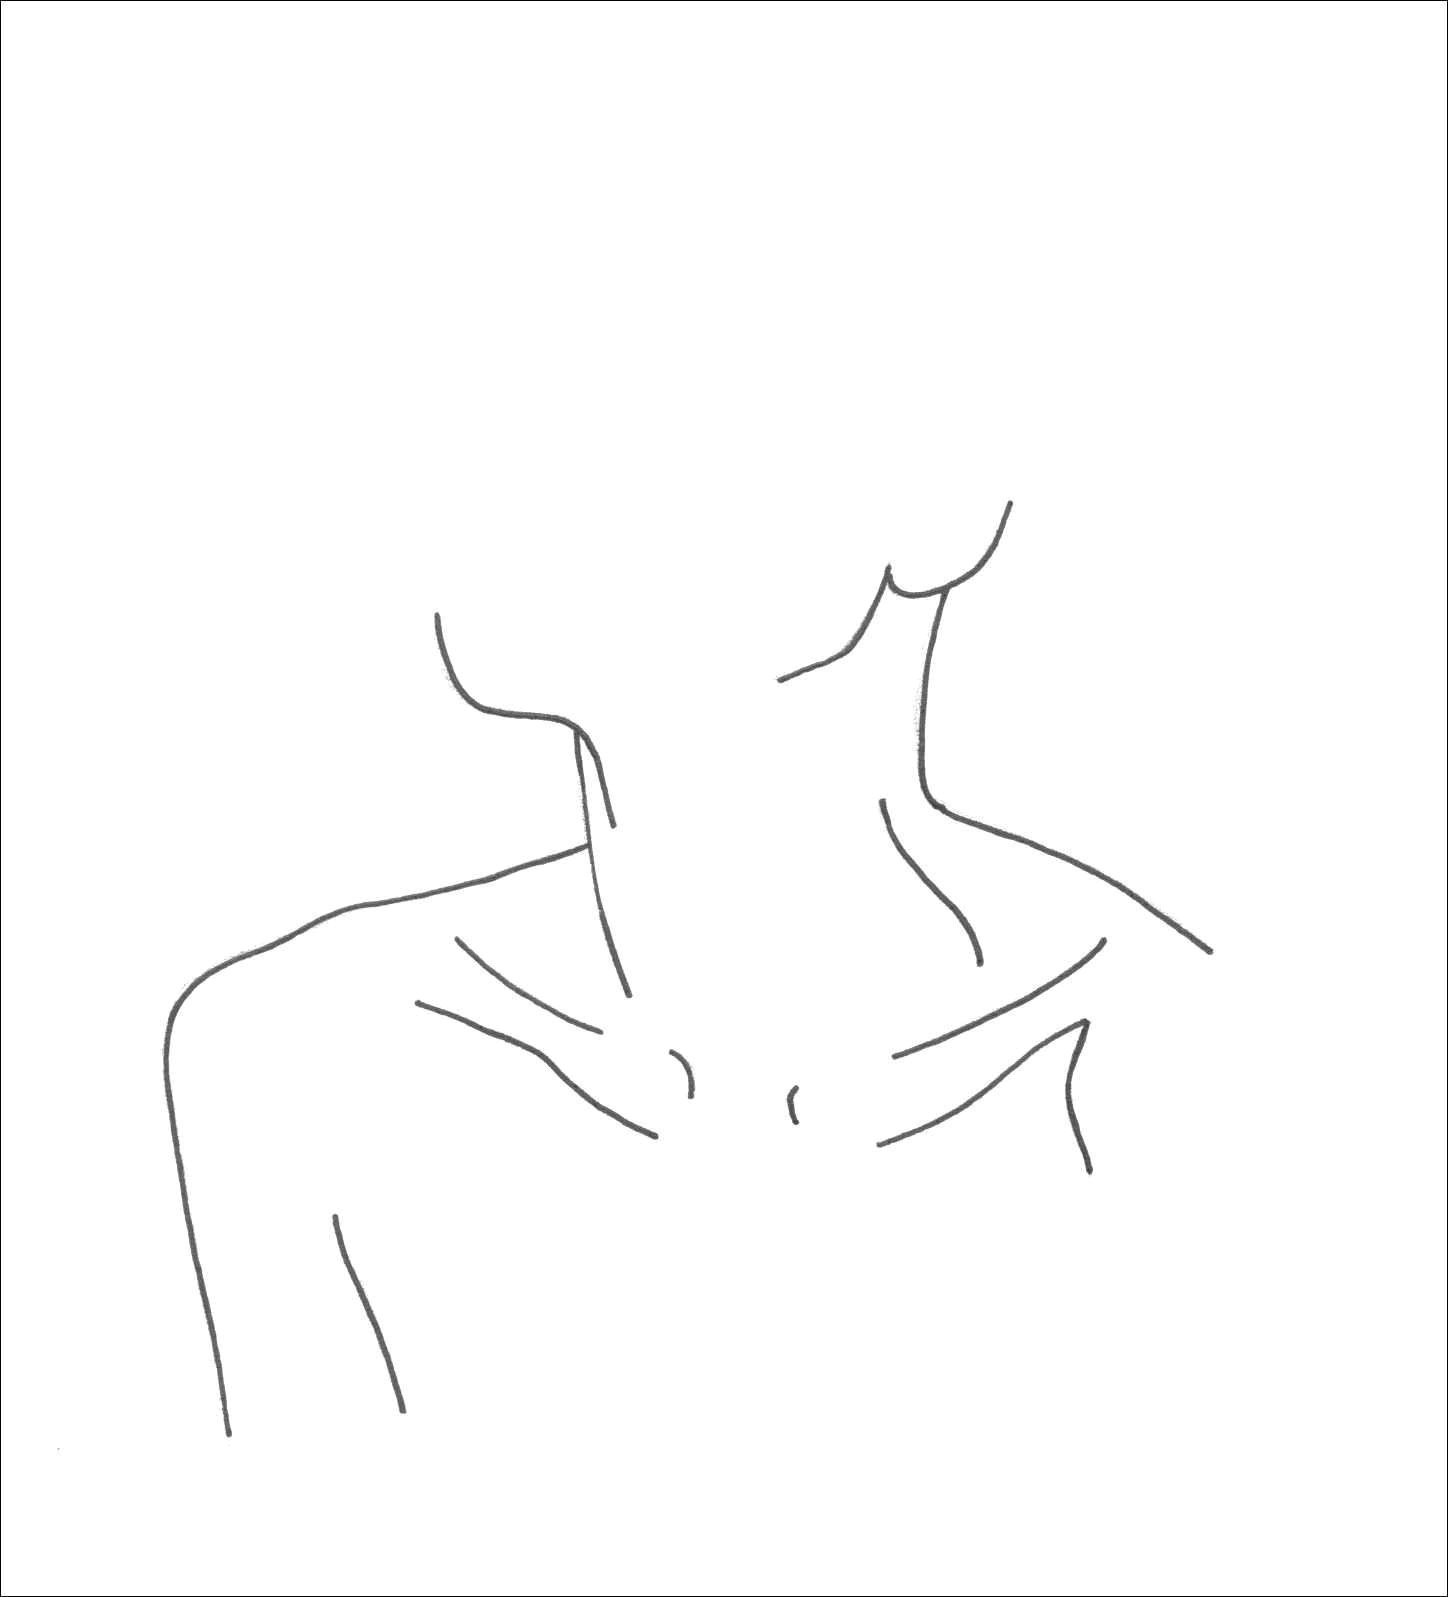 tumblr bilder selber malen foto minimal neckline drawing thecolourstudy by thecolourstudy